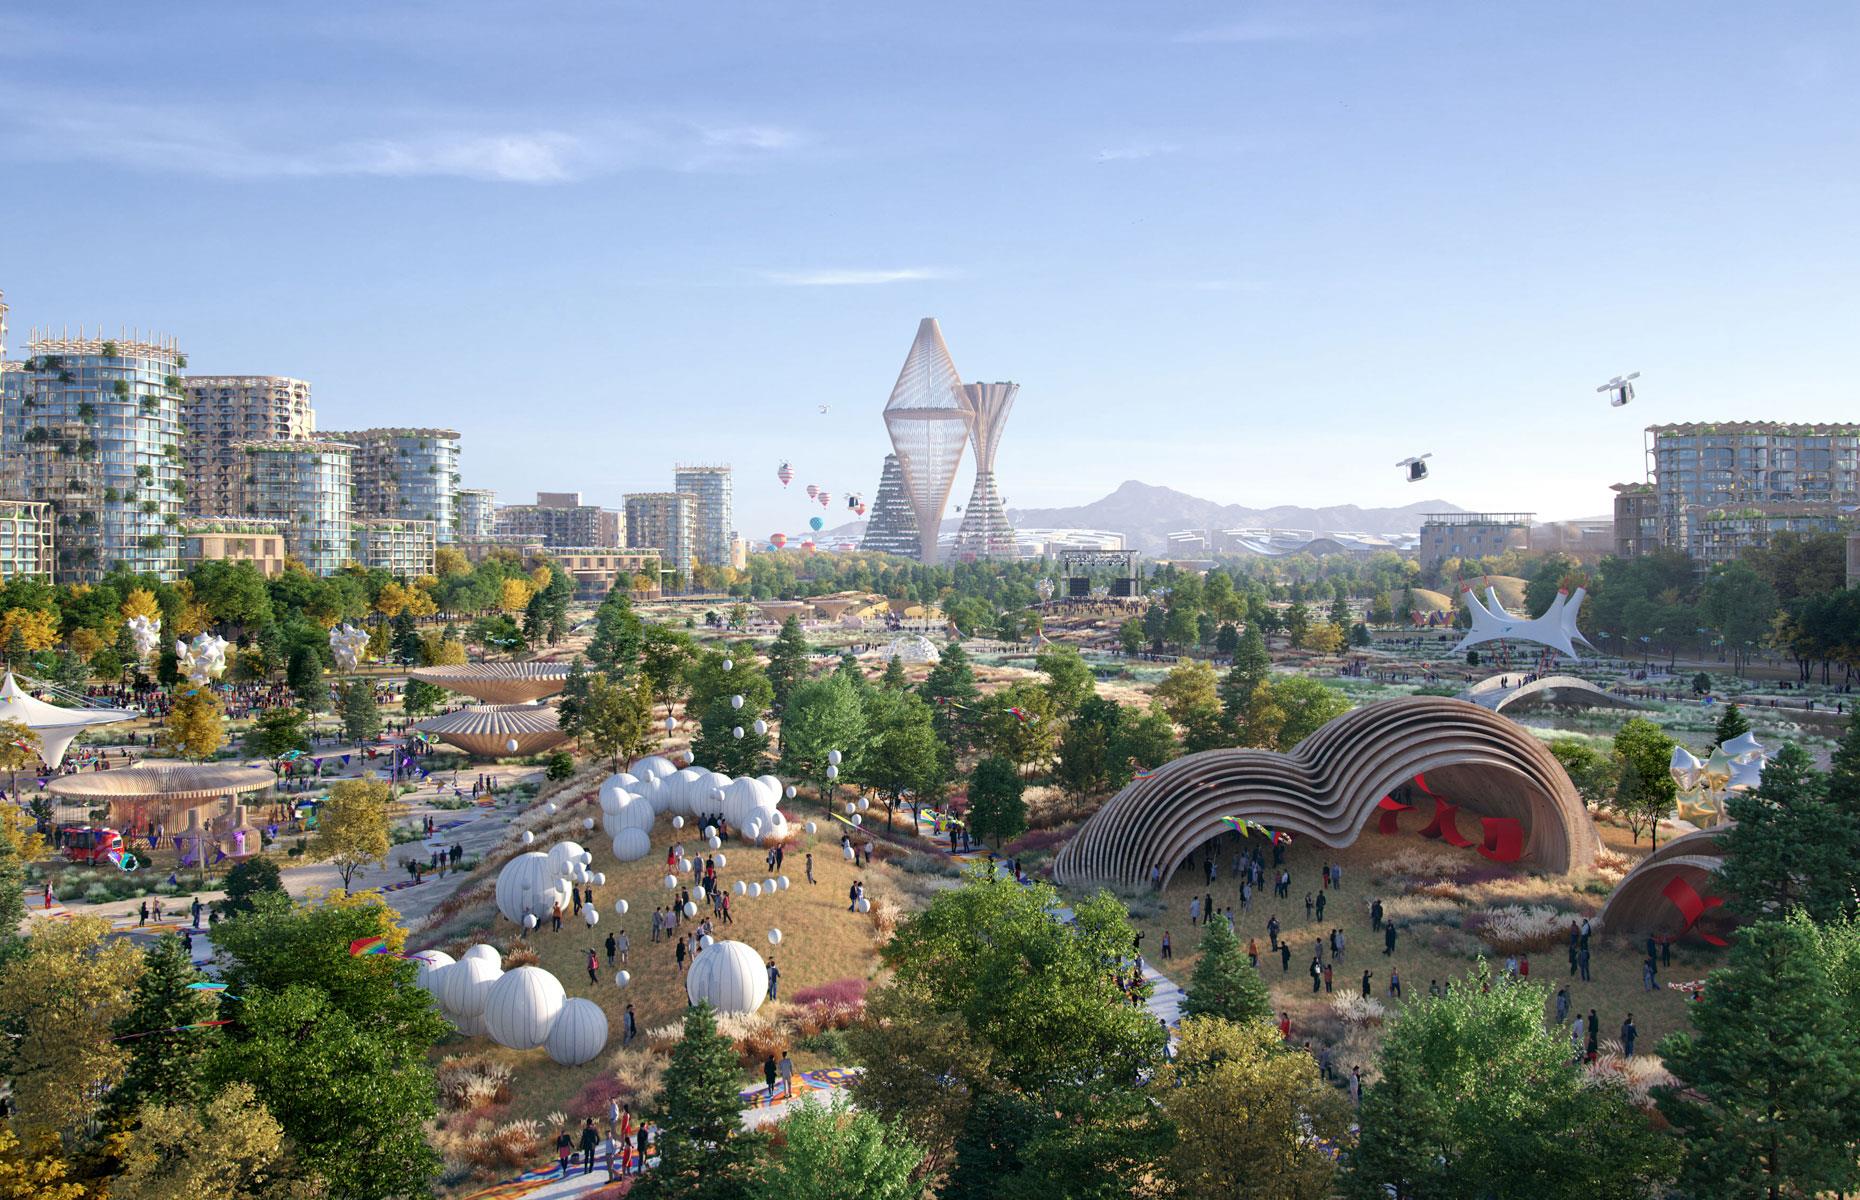 <p>Lore has hired <a href="https://big.dk/">Bjarke Ingels Group (BIG)</a> to plan the project and the top architecture firm hasn't disappointed. They've created wow-factor renderings of the futuristic city, which will eventually occupy a 150,000-acre site somewhere in the arid west of the US. Telosa's centerpiece is a lattice-like skyscraper called the Equitism Tower. Located in the middle of a sprawling park dotted with vibrant public spaces, this “beacon of the city” will serve as a social hub, a water storage and solar-power facility and a vertical farm producing food for the denizens.</p>